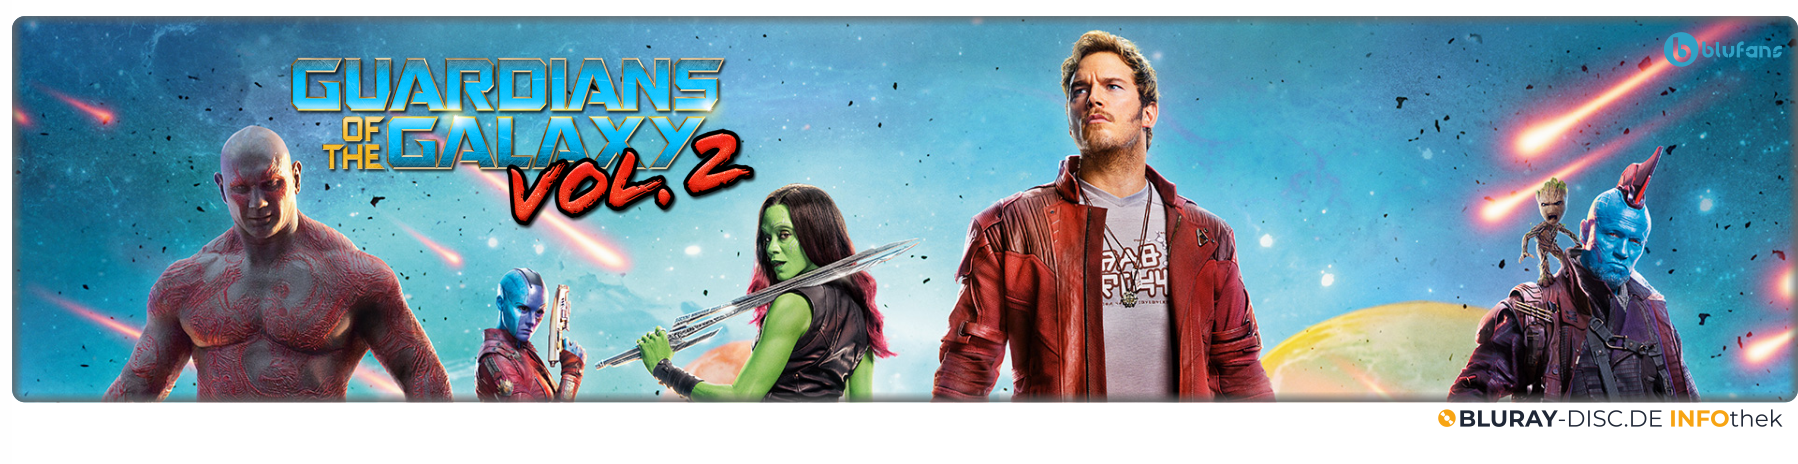 Guardians_of_the_Galaxy_Vol_2.png